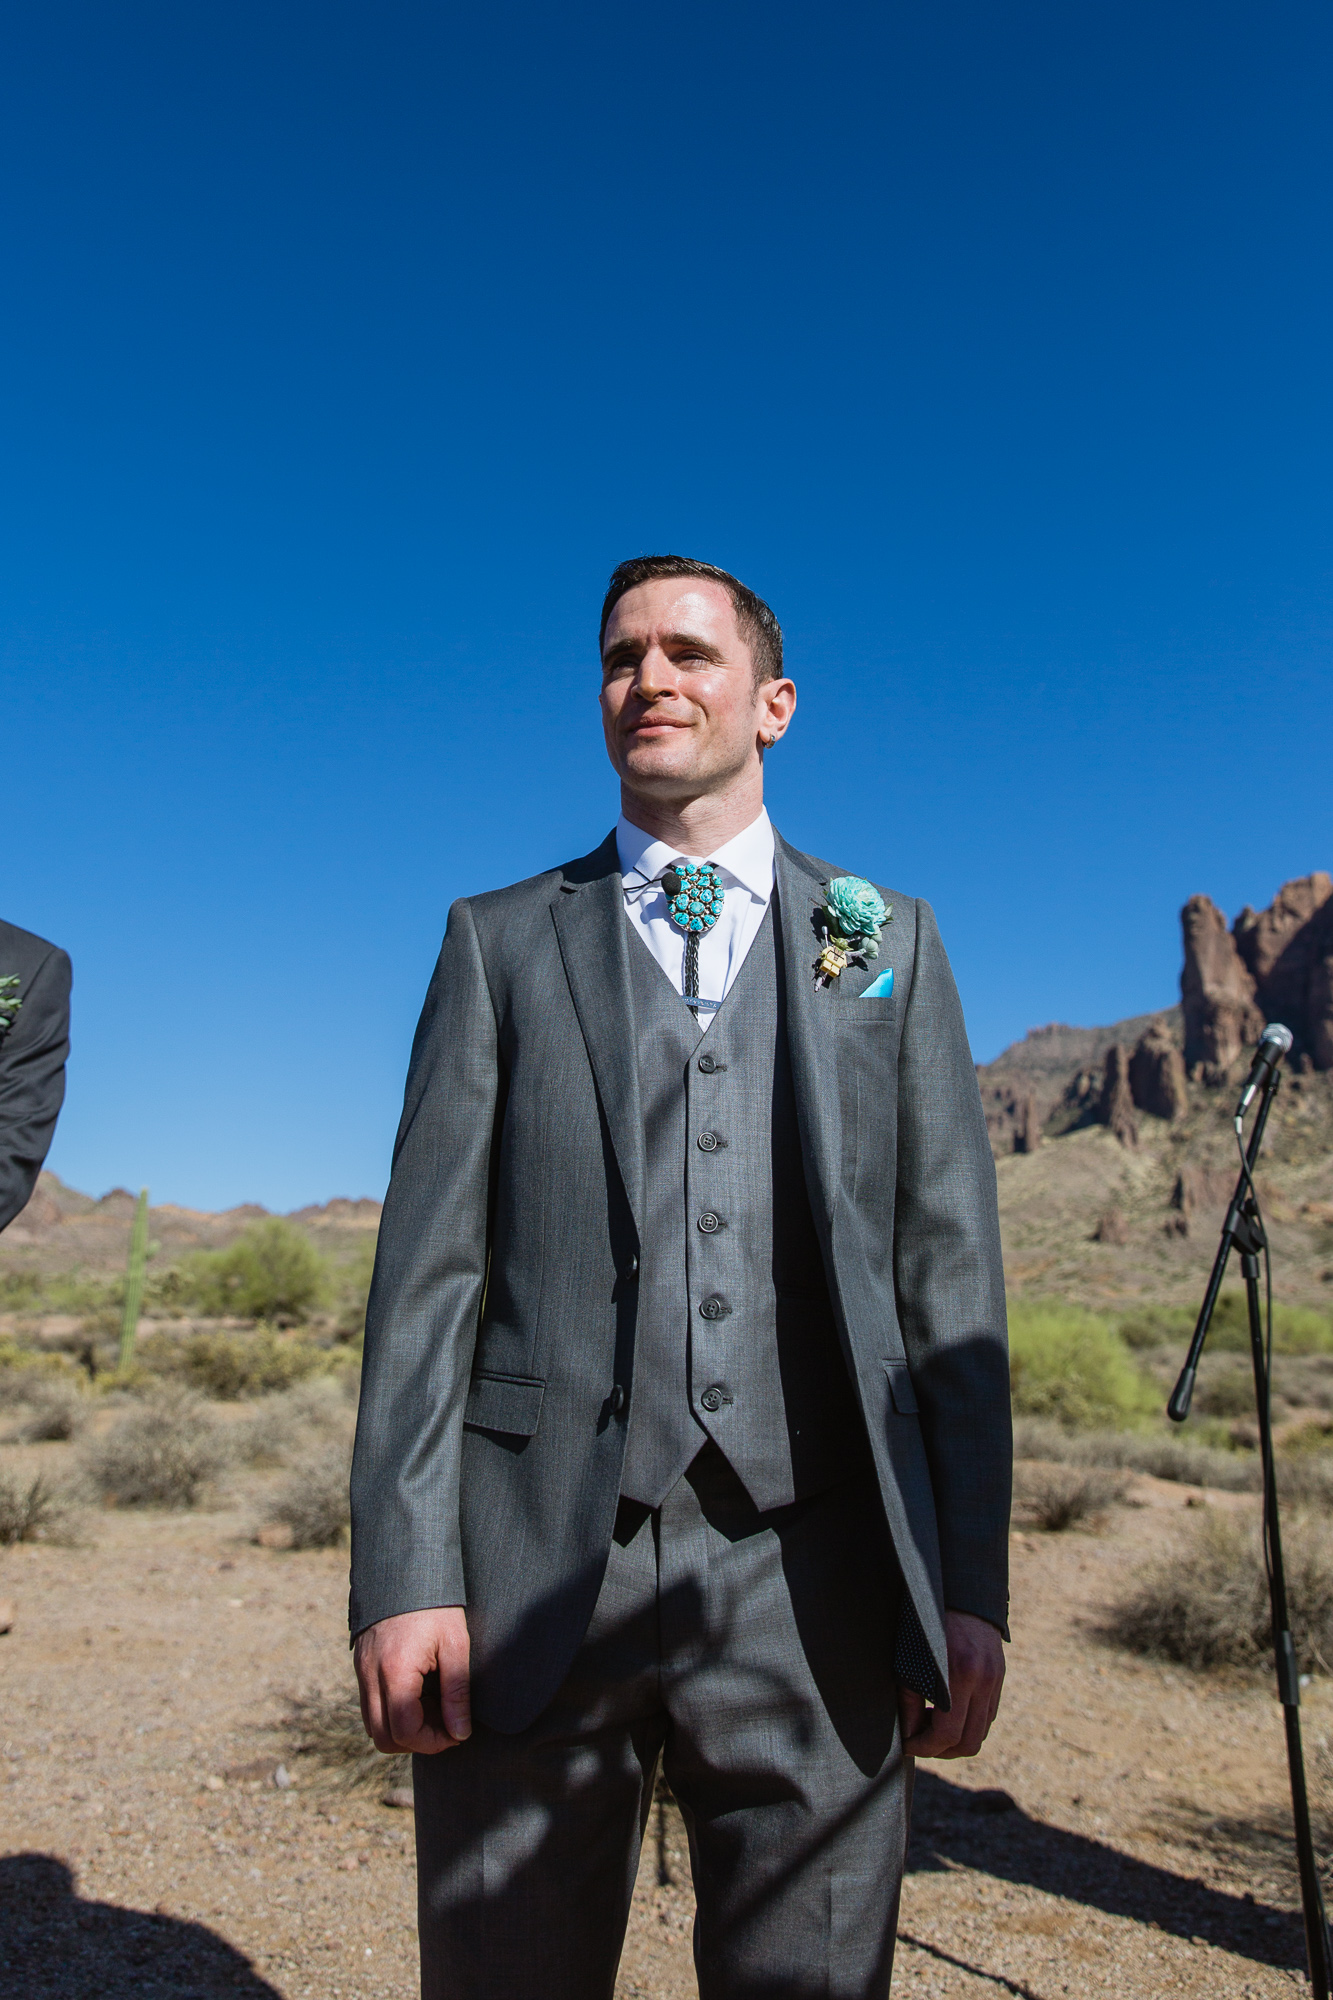 Groom seeing his bride walk down the aisle at Lost Dutchman State Park by Arizona photographers PMA Photography.